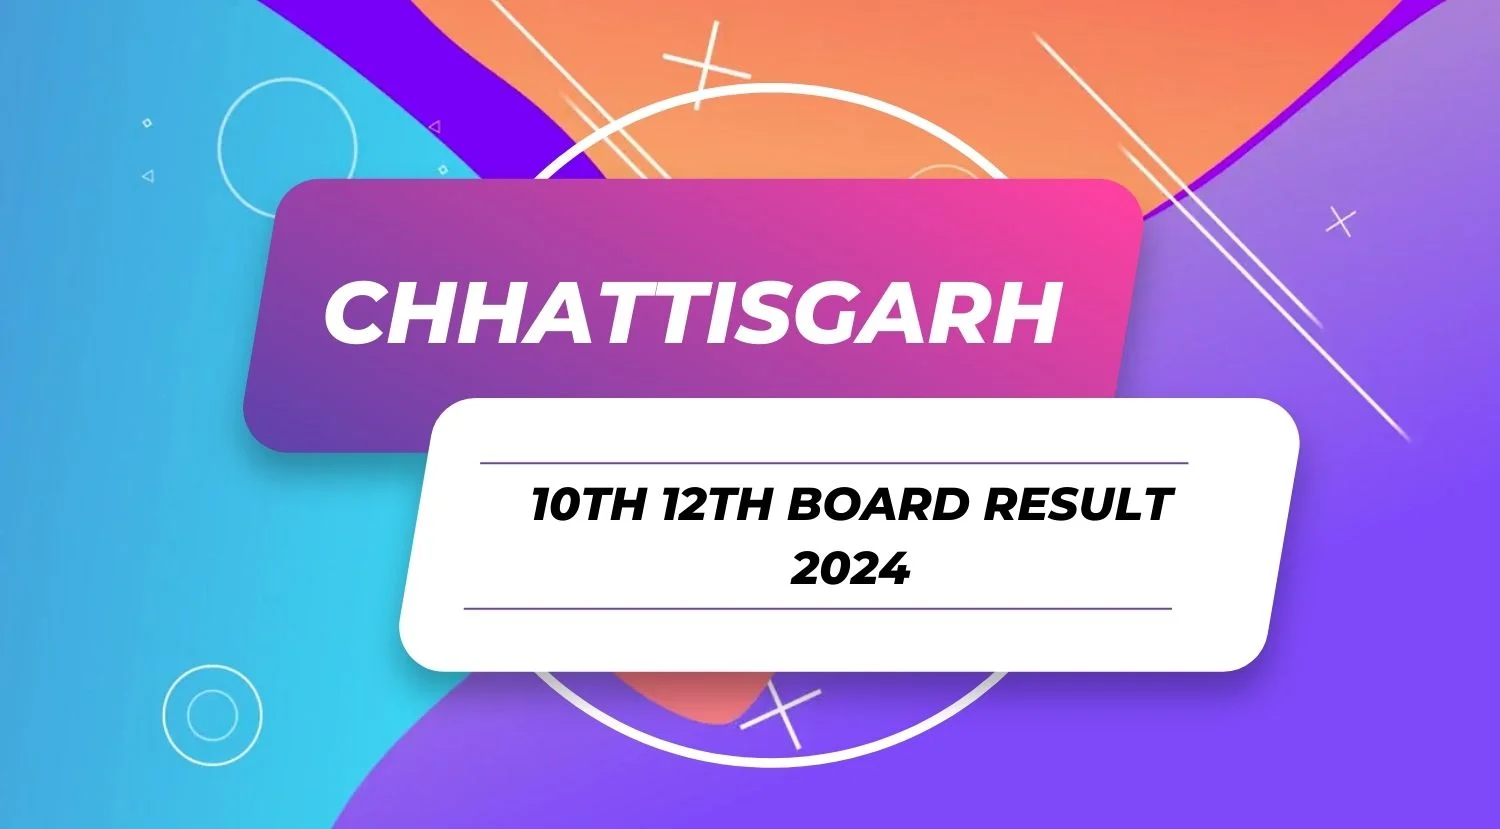 Chhattisgarh 10th 12th Board Result 2024 - How to Check CGBSE Result 2024 Online